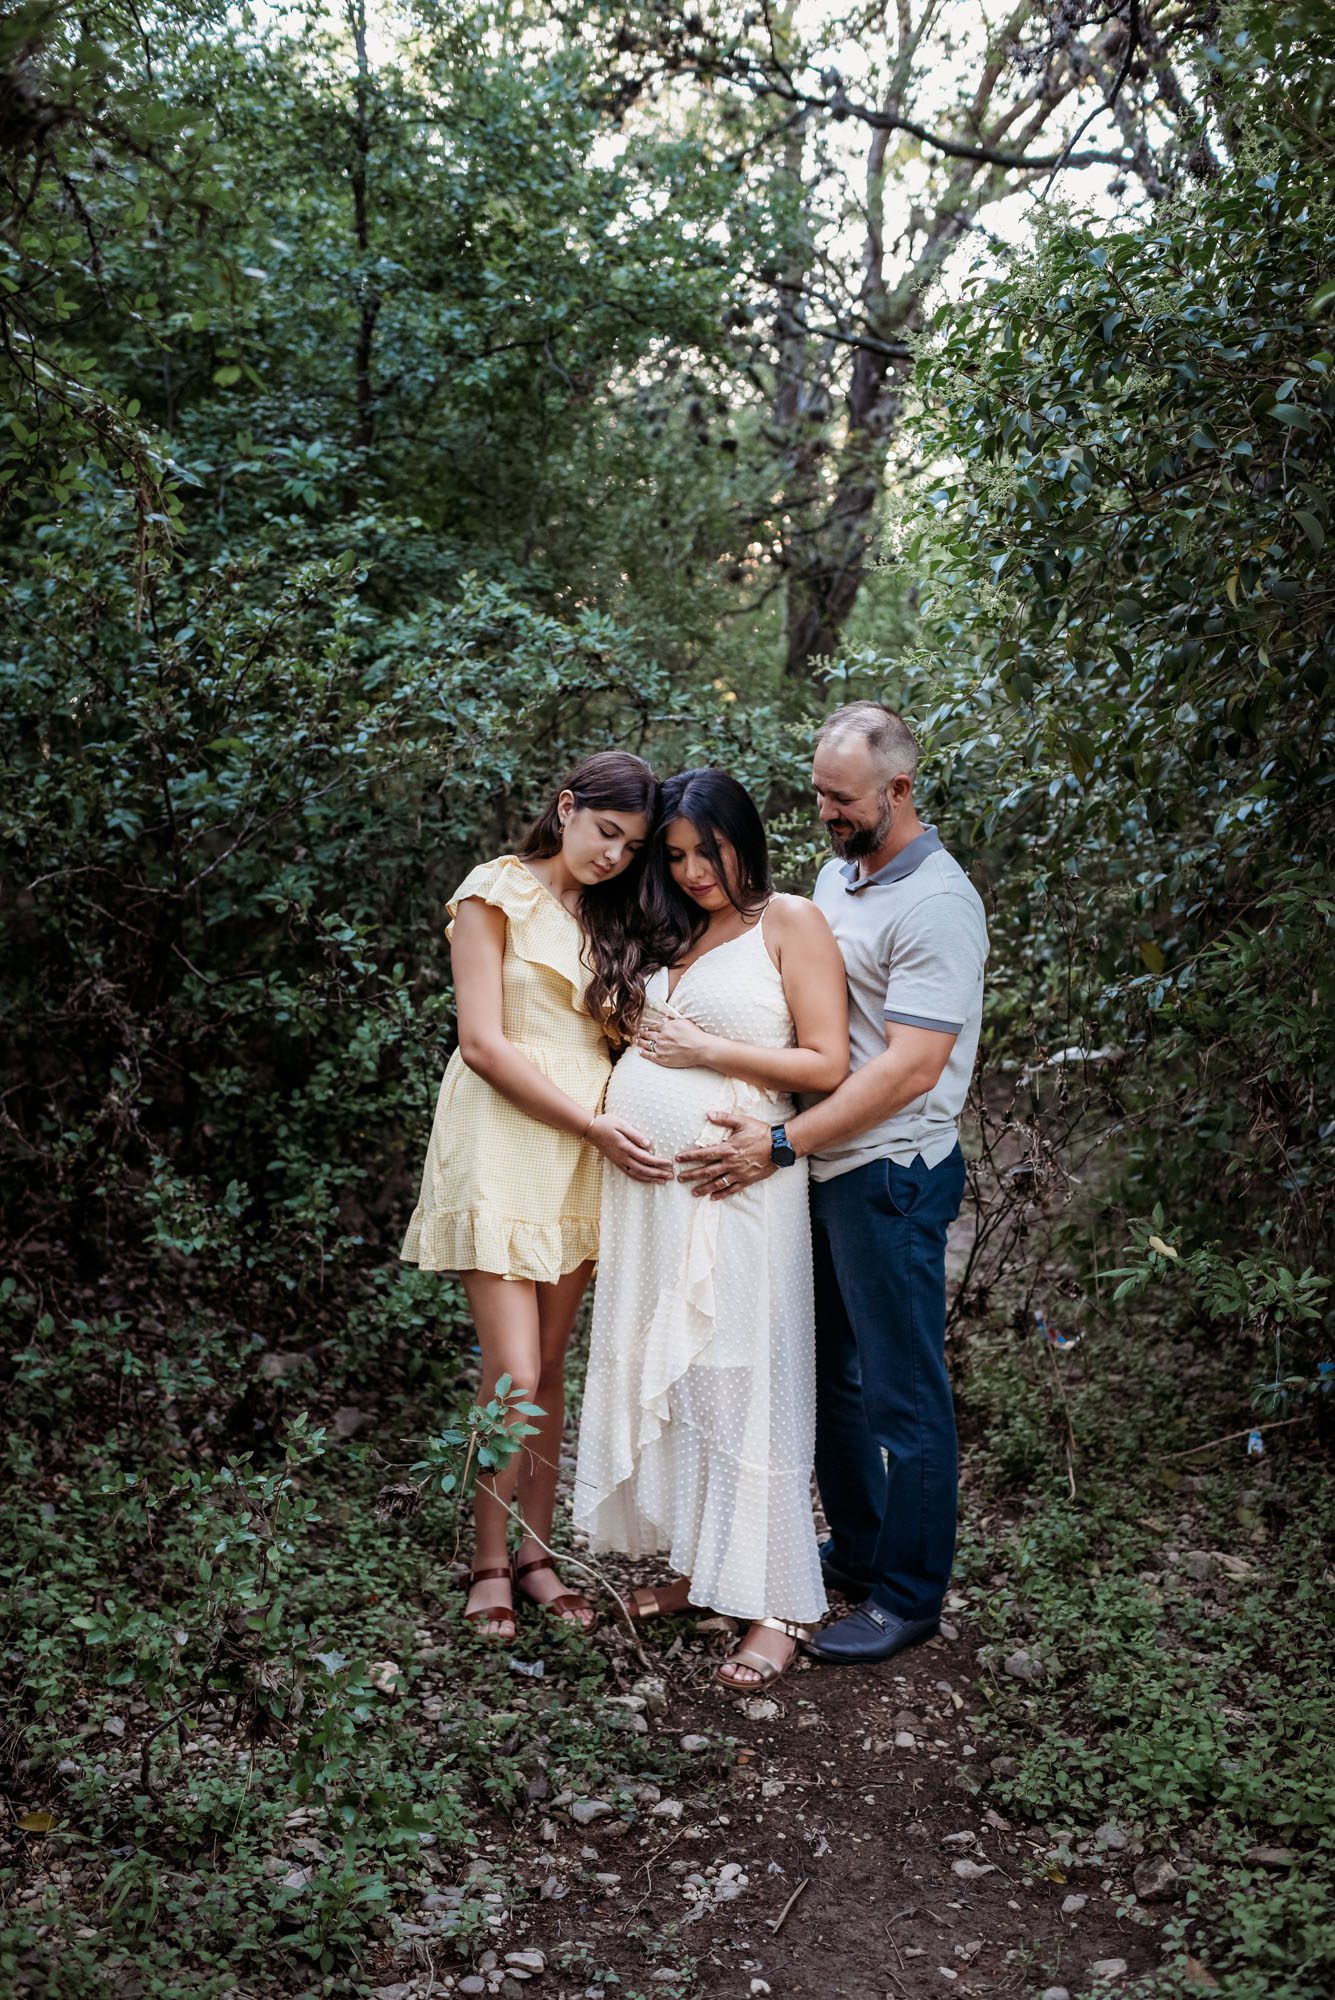 Expectant mother with family in the woods, San Antonio Maternity Photographer